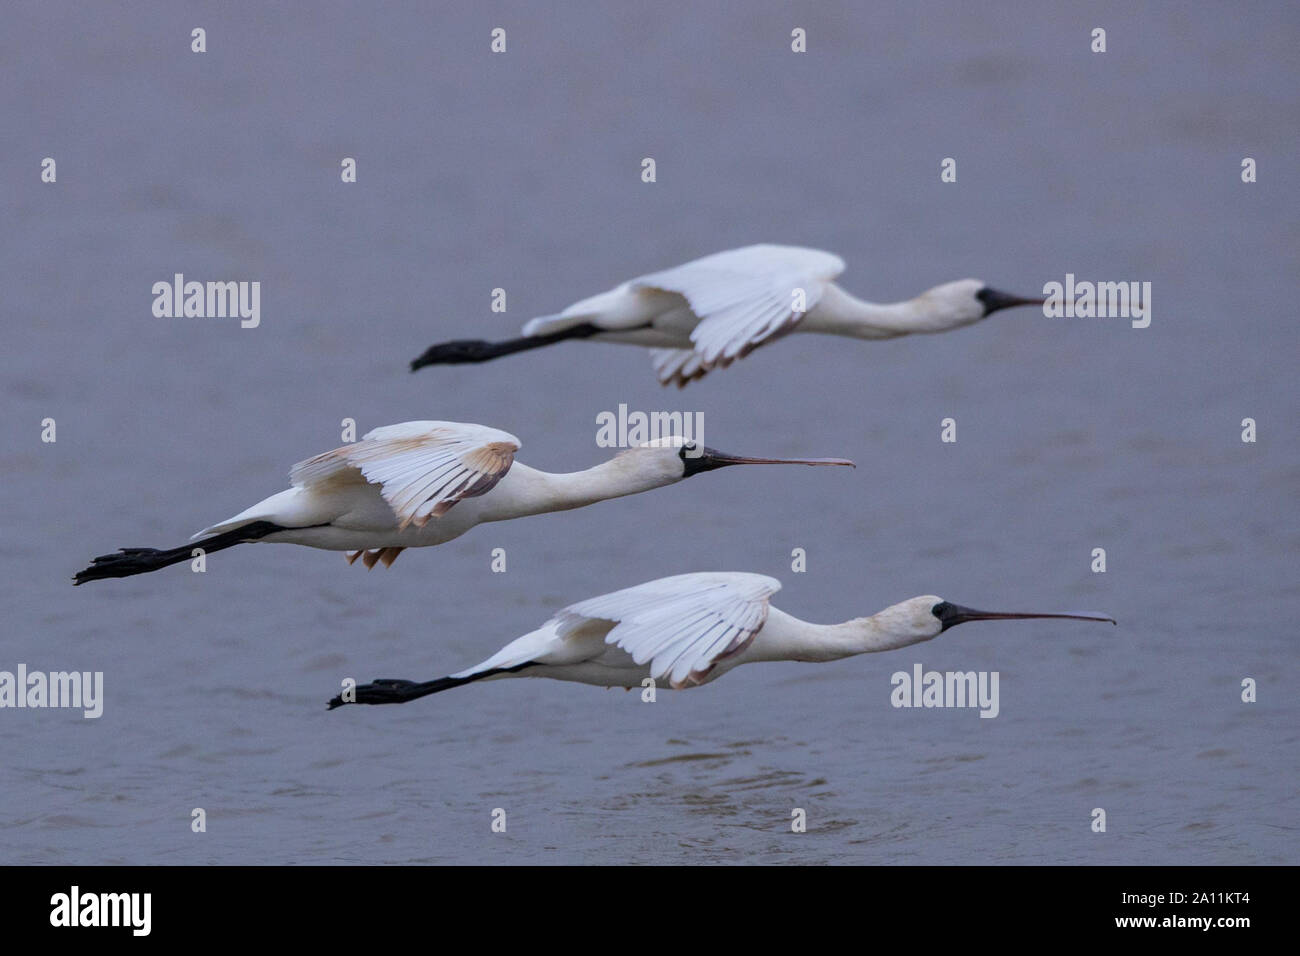 (190923) --BEIJING, Sept. 23, 2019 (Xinhua) -- Three black-faced Spoonbills are seen in Macao, south China, April 7, 2018. Macao Special Administrative Region of the People's Republic of China is on the southwestern side of the Pearl River Delta. Although it is a densely populated region, with a population of about 670,000 and an area of some 33 km?, Macao has been putting efforts on ecological protection. Macao has over 20 urban parks or gardens, four rural parks and three wetland ecological zones. Its unique geographical location provides migrant birds valuable resting and wintering grounds Stock Photo